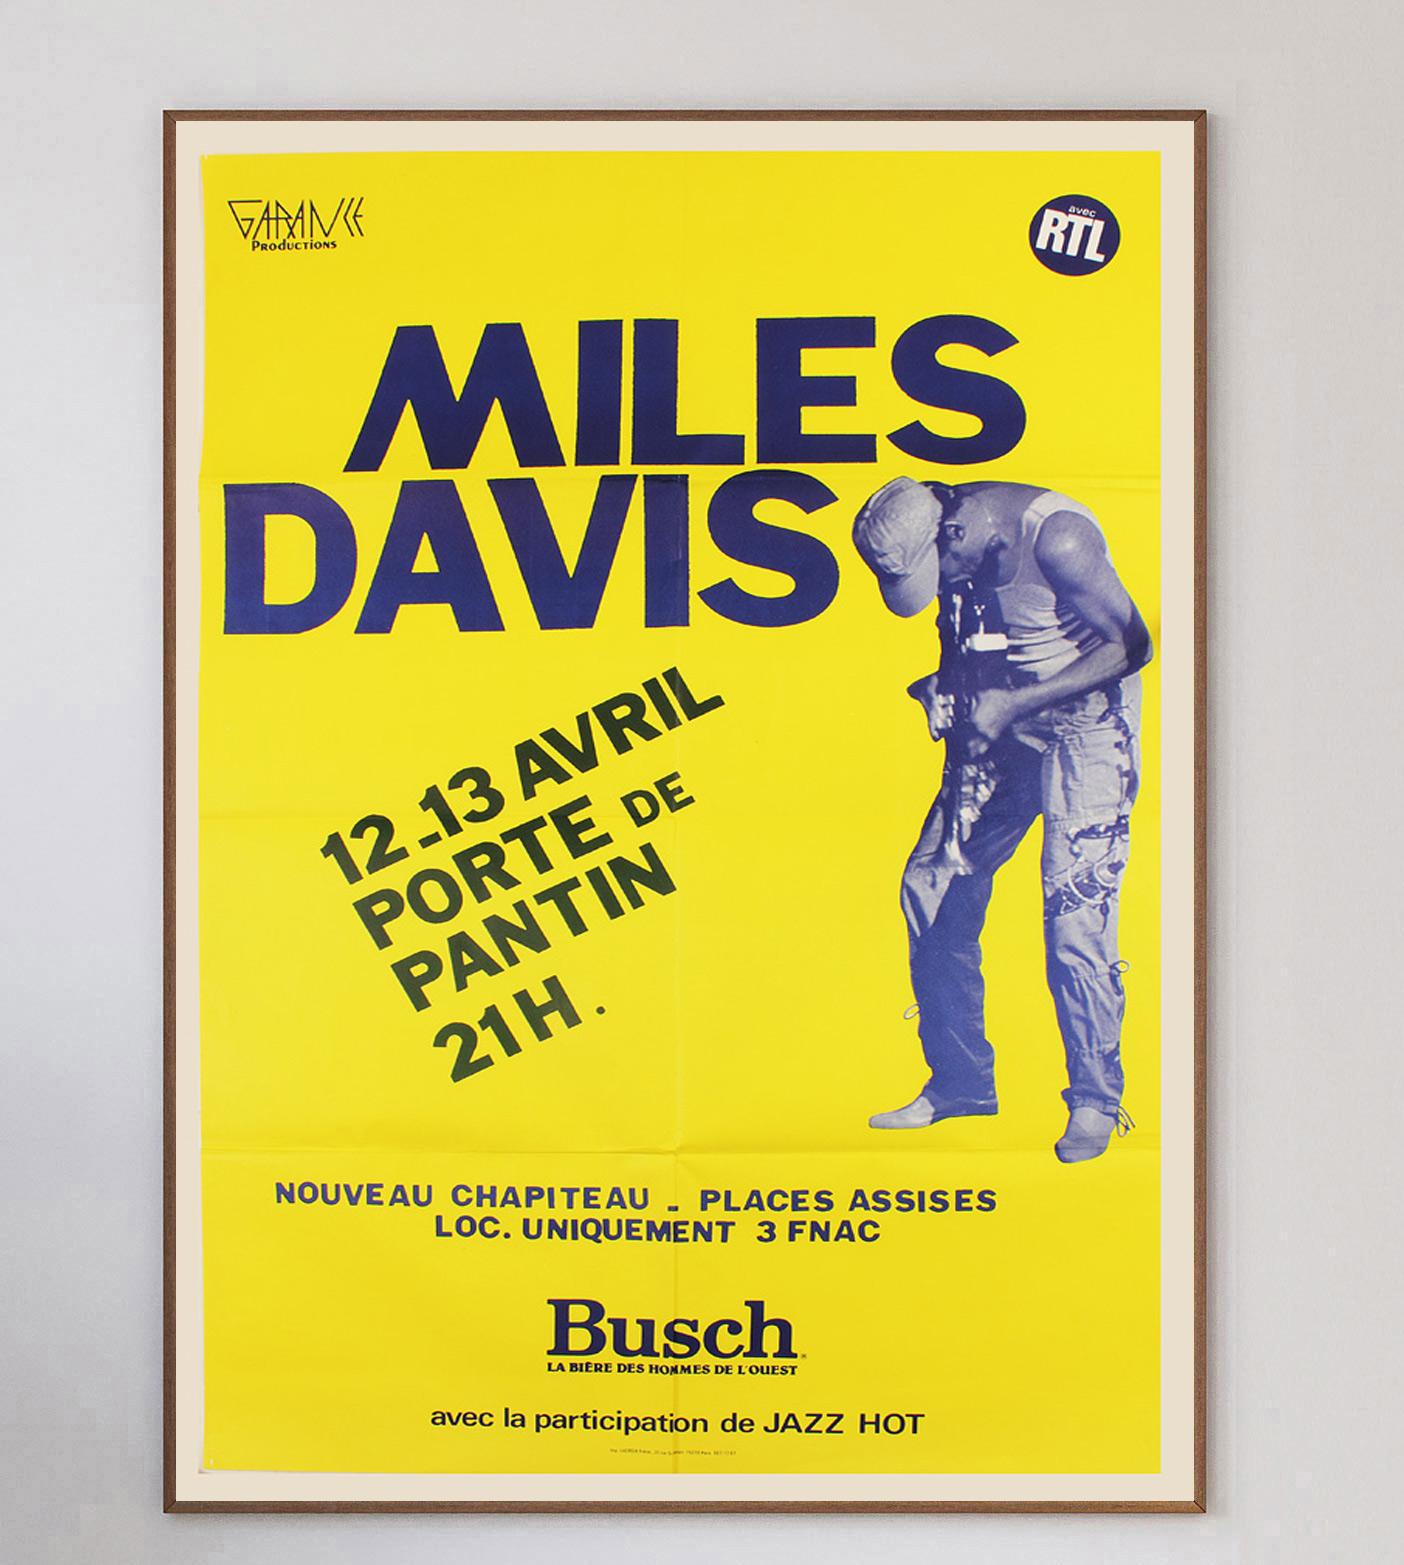 Beautiful and vibrant poster advertising Jazz great Miles Davis live in concert in Paris at Porte de Pantin in April 1983. With iconic albums such as Kind of Blue, Miles Davis is regarded as one of the greatest artists of the 20th century, and his